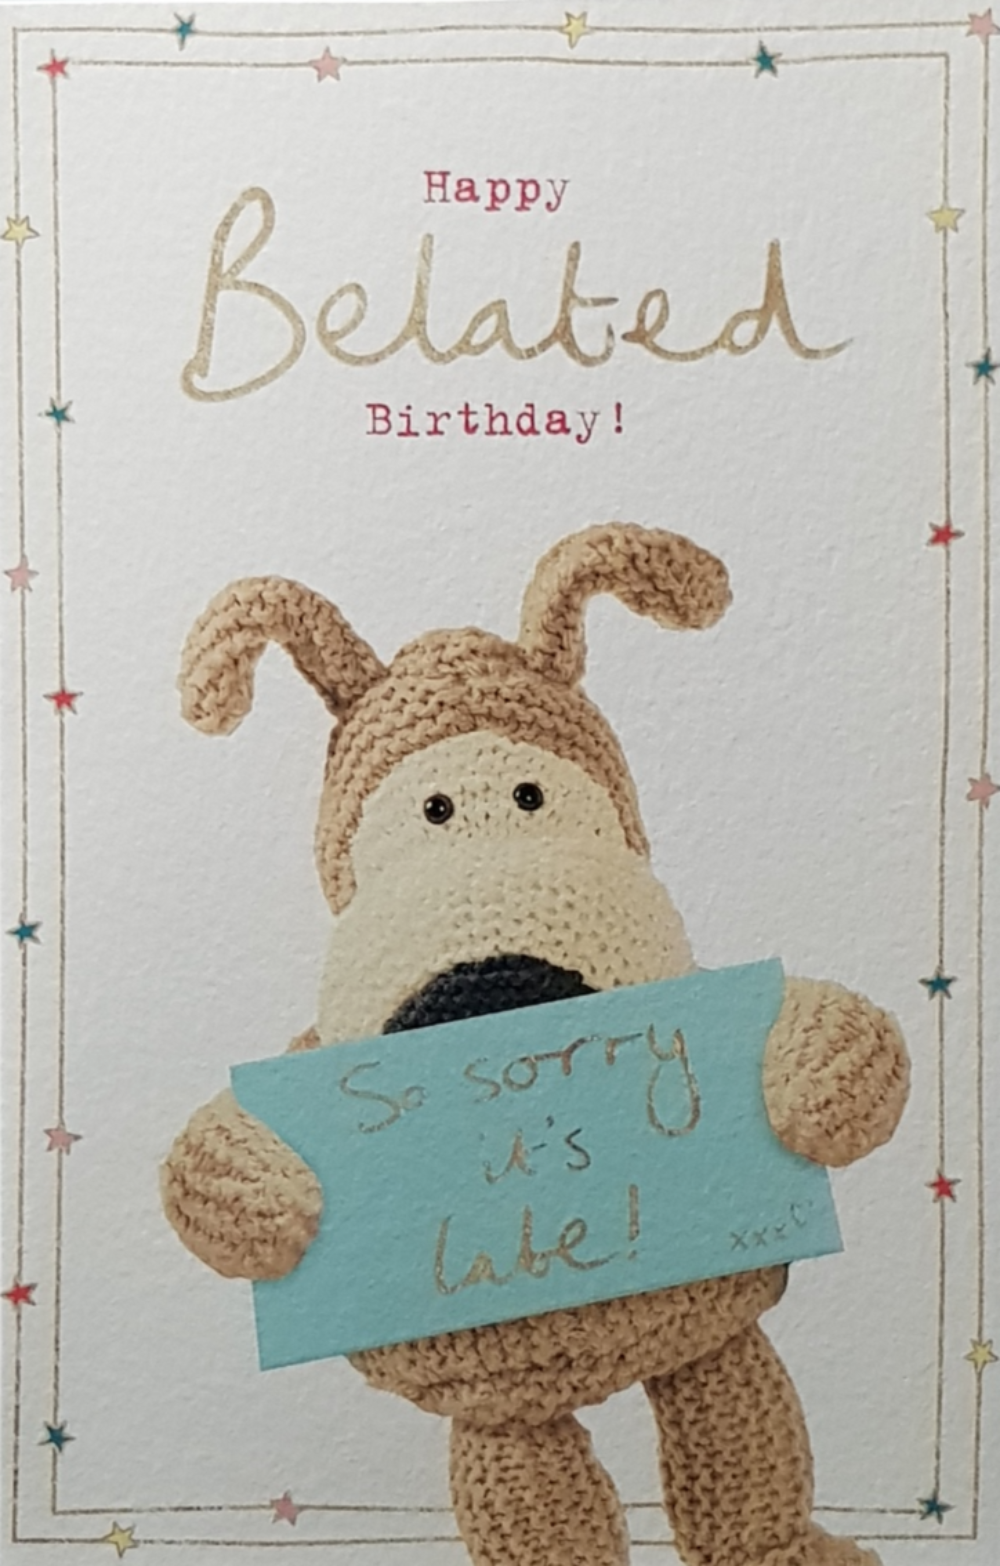 Birthday Card - Belated Birthday / A Brown Dog Holding A Blue Note 'So Sorry'